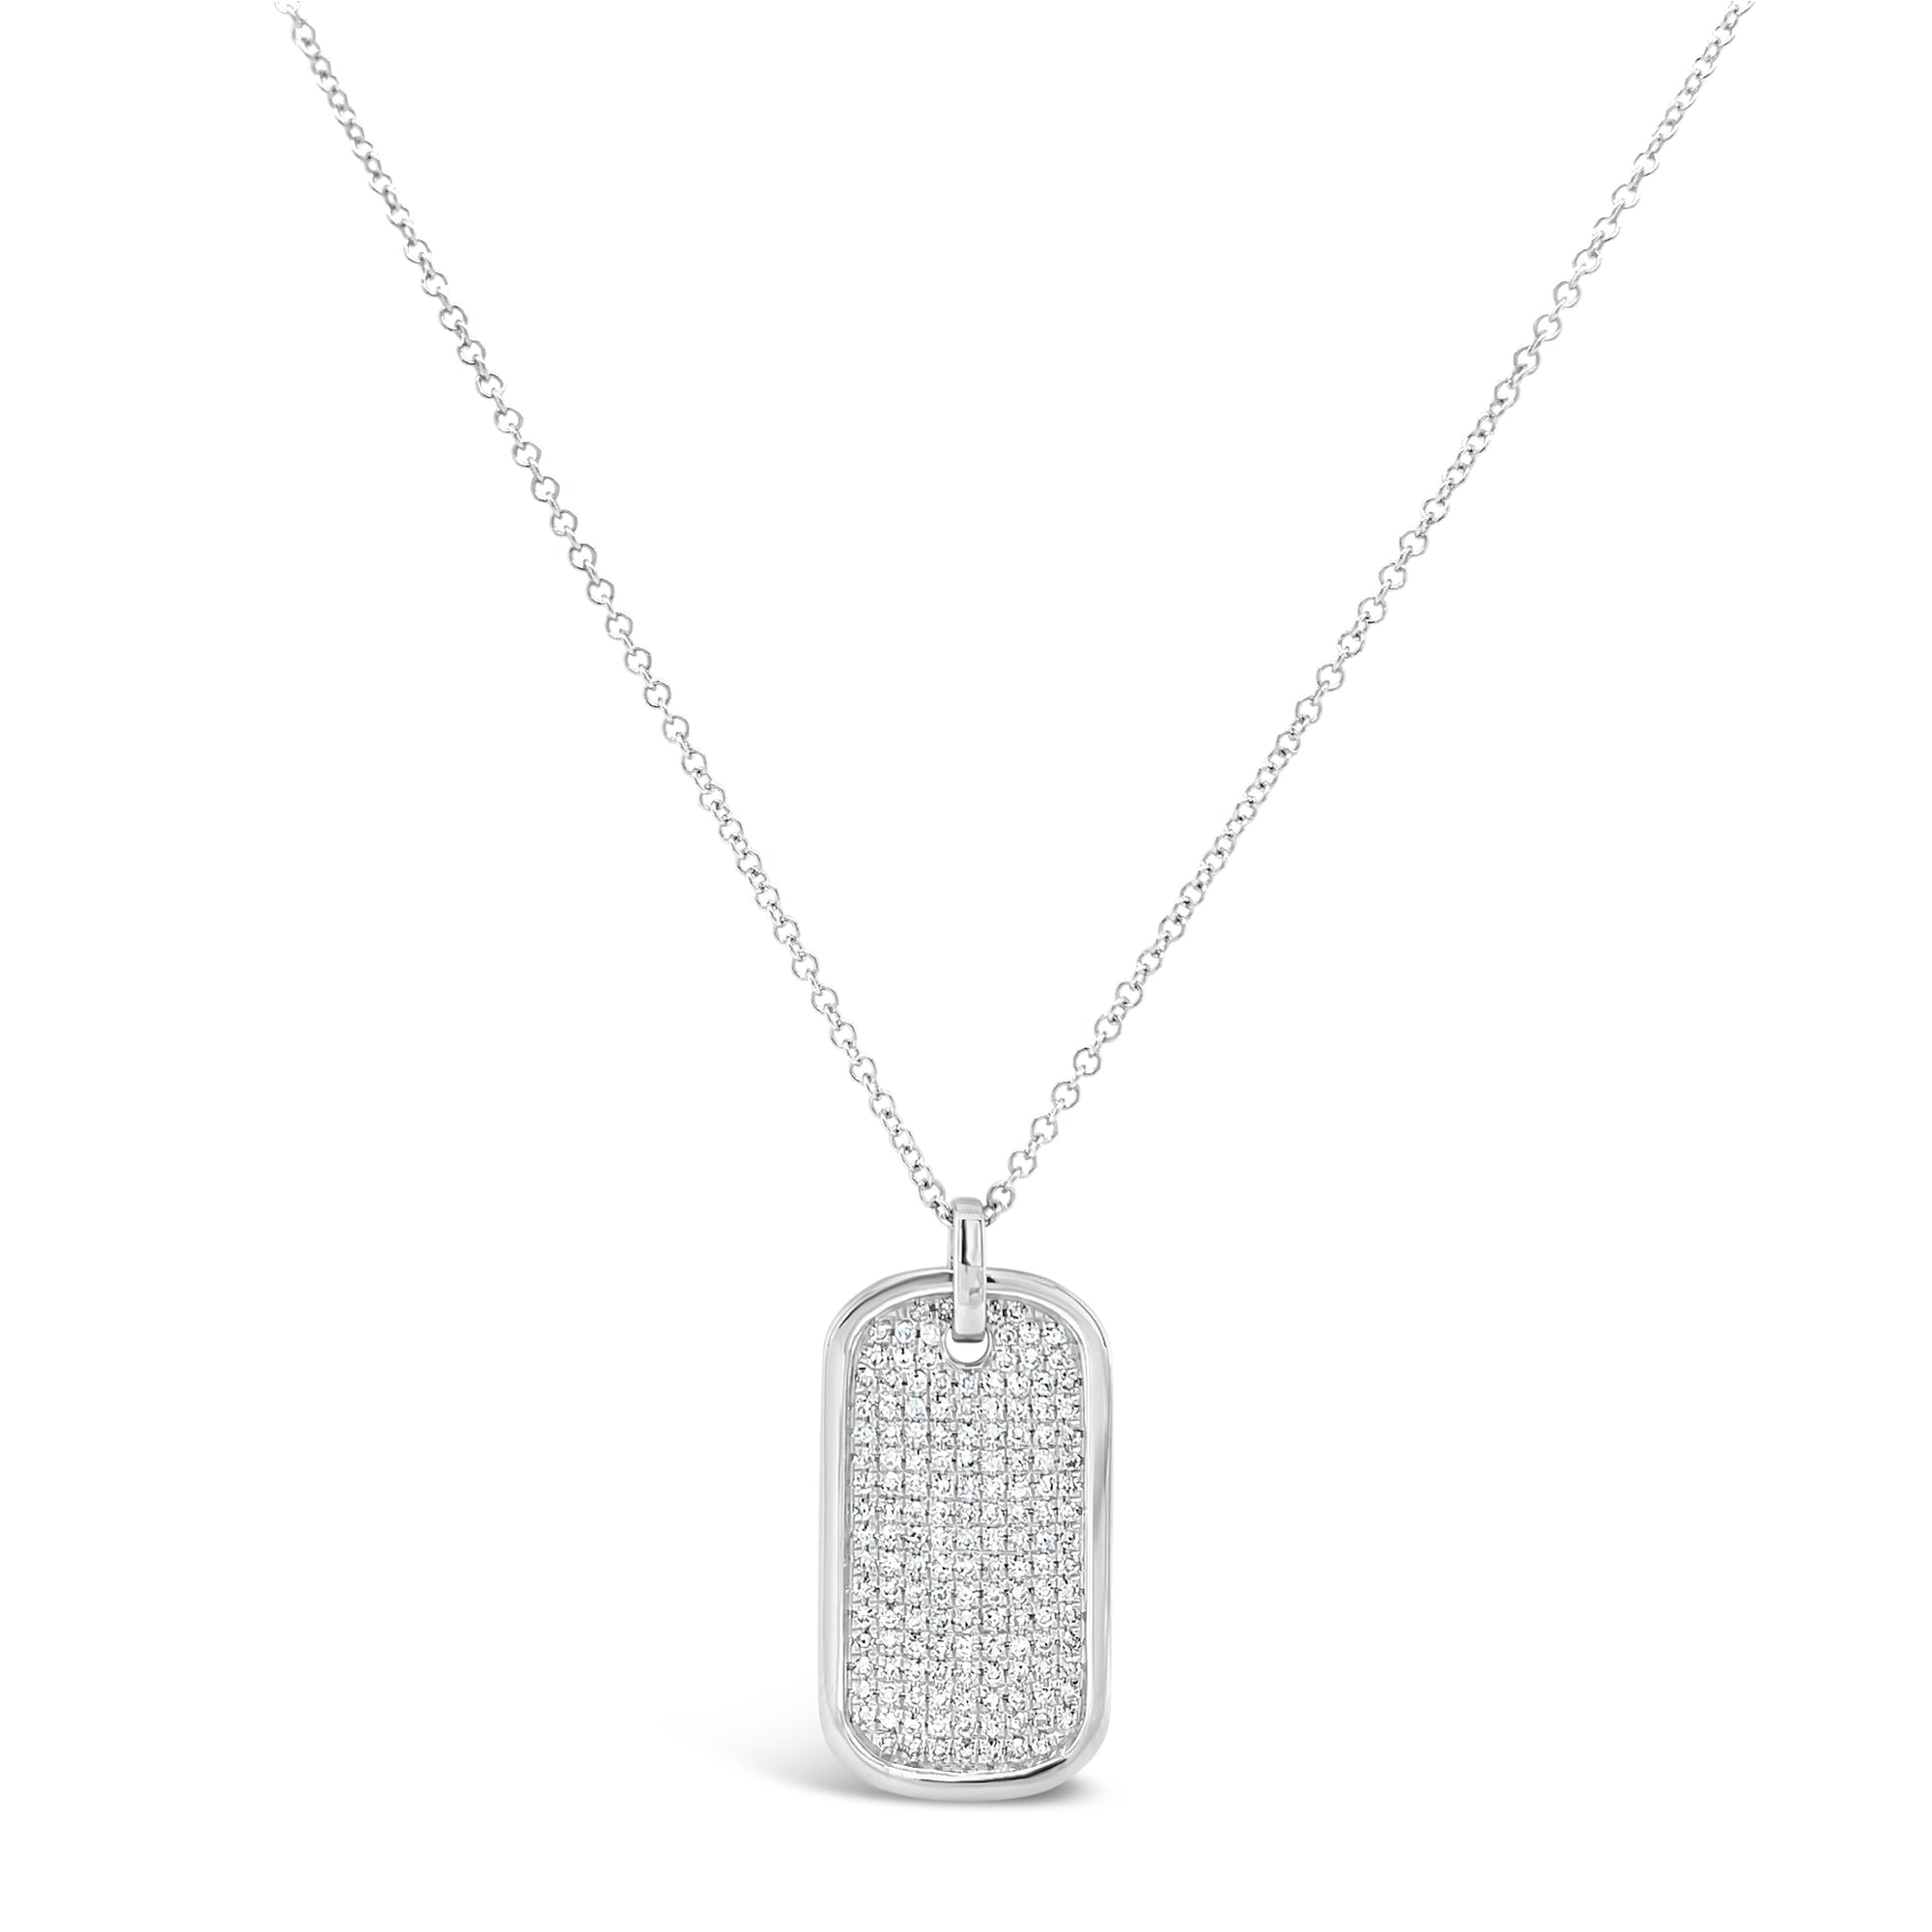 Diamond Dog Tag Necklace  - 14kt gold weighing 3.40 grams   - 150 round diamonds with a 0.33 total carat weight